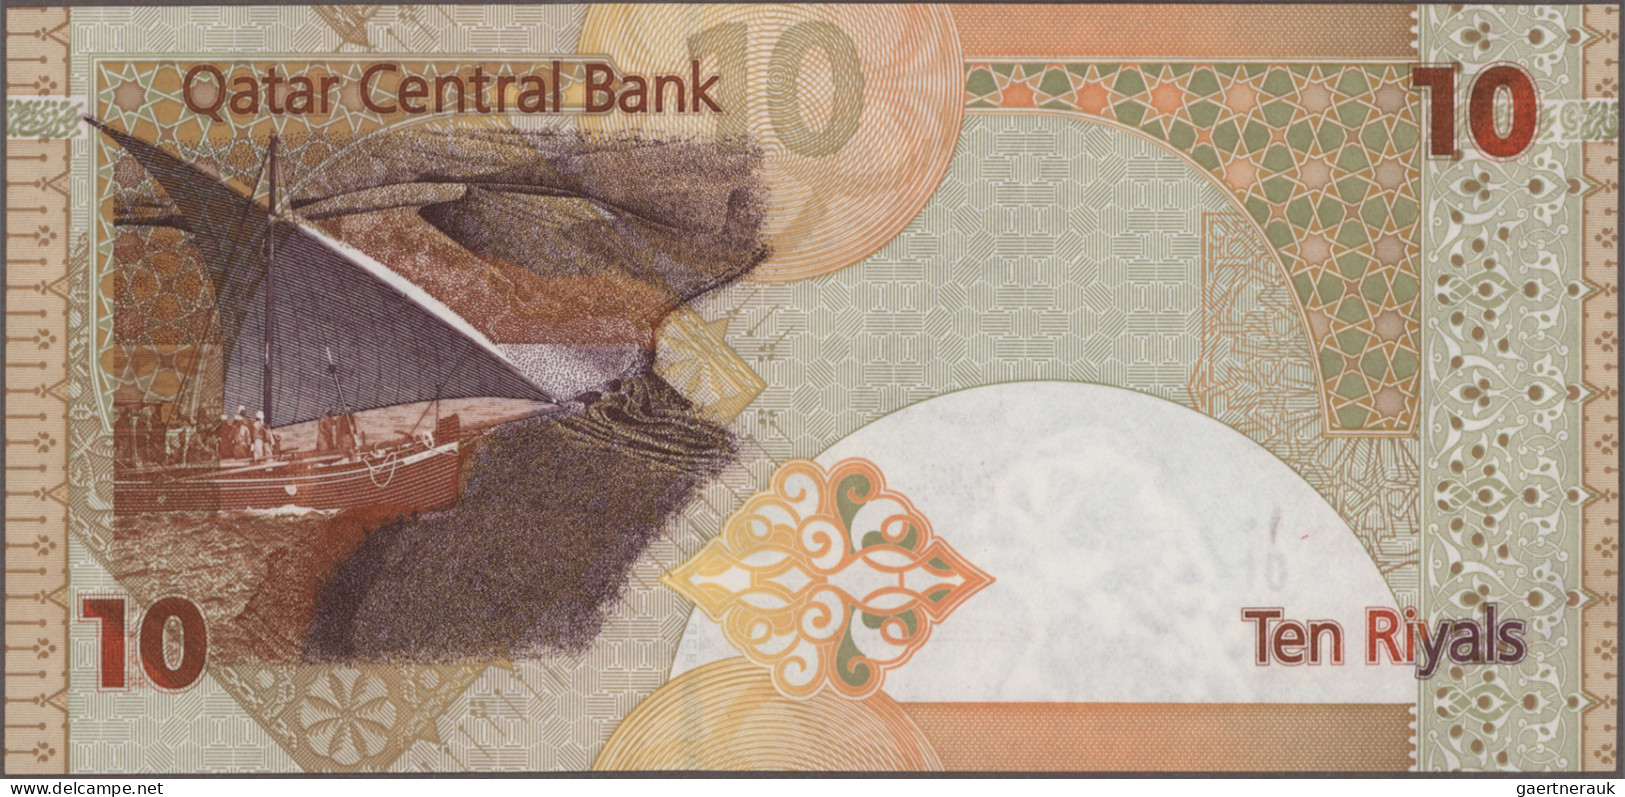 Quatar: The Qatar Monetary Agency and Qatar Central Bank, lot with 14 banknotes,